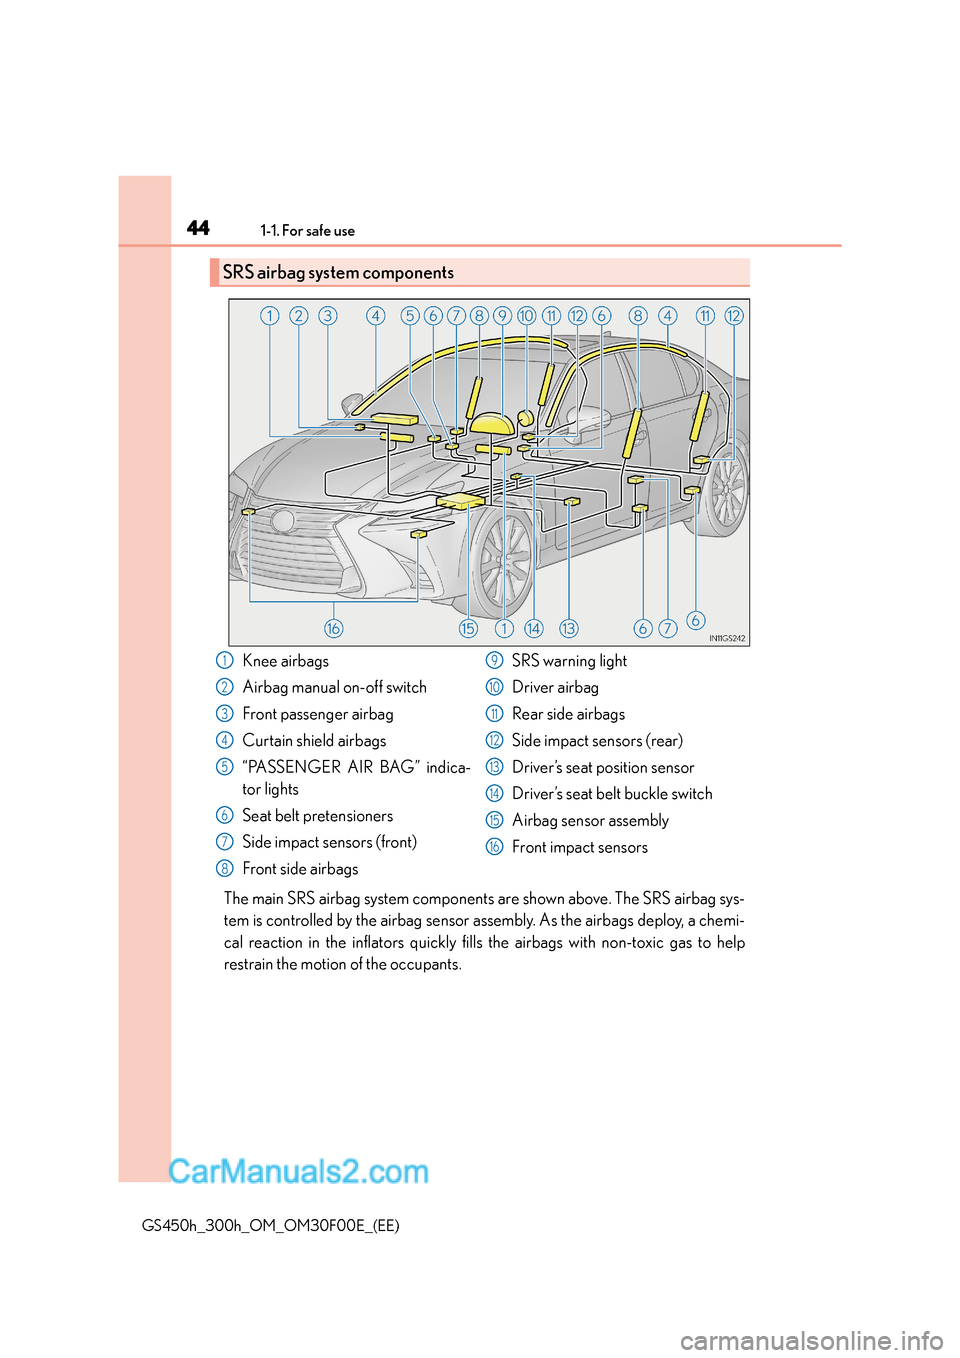 Lexus GS300h 2015 Service Manual 441-1. For safe use
GS450h_300h_OM_OM30F00E_(EE)
The main SRS airbag system components are shown above. The SRS airbag sys-
tem is controlled by the airbag sensor assembly. As the airbags deploy, a ch